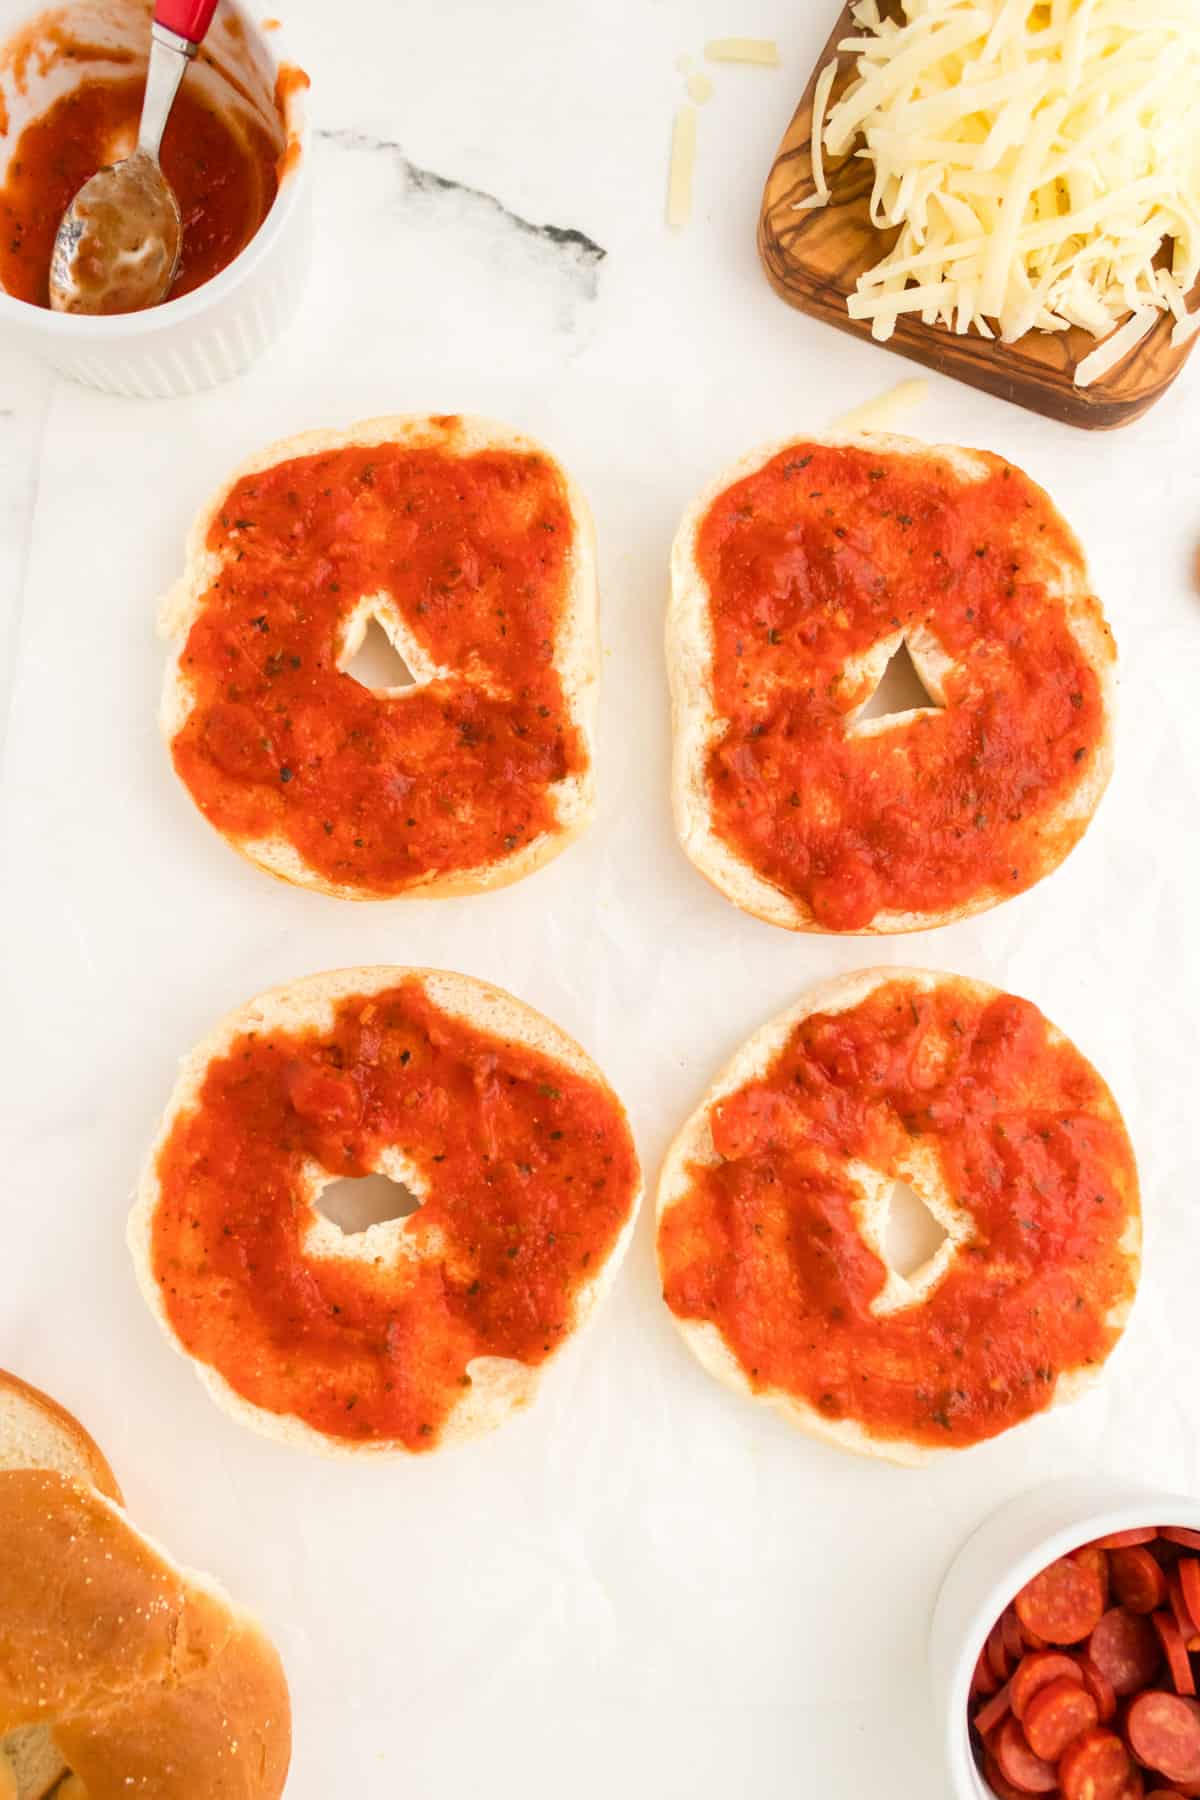 Bagel halves with 1-2 Tablespoons of sauce spread on them.